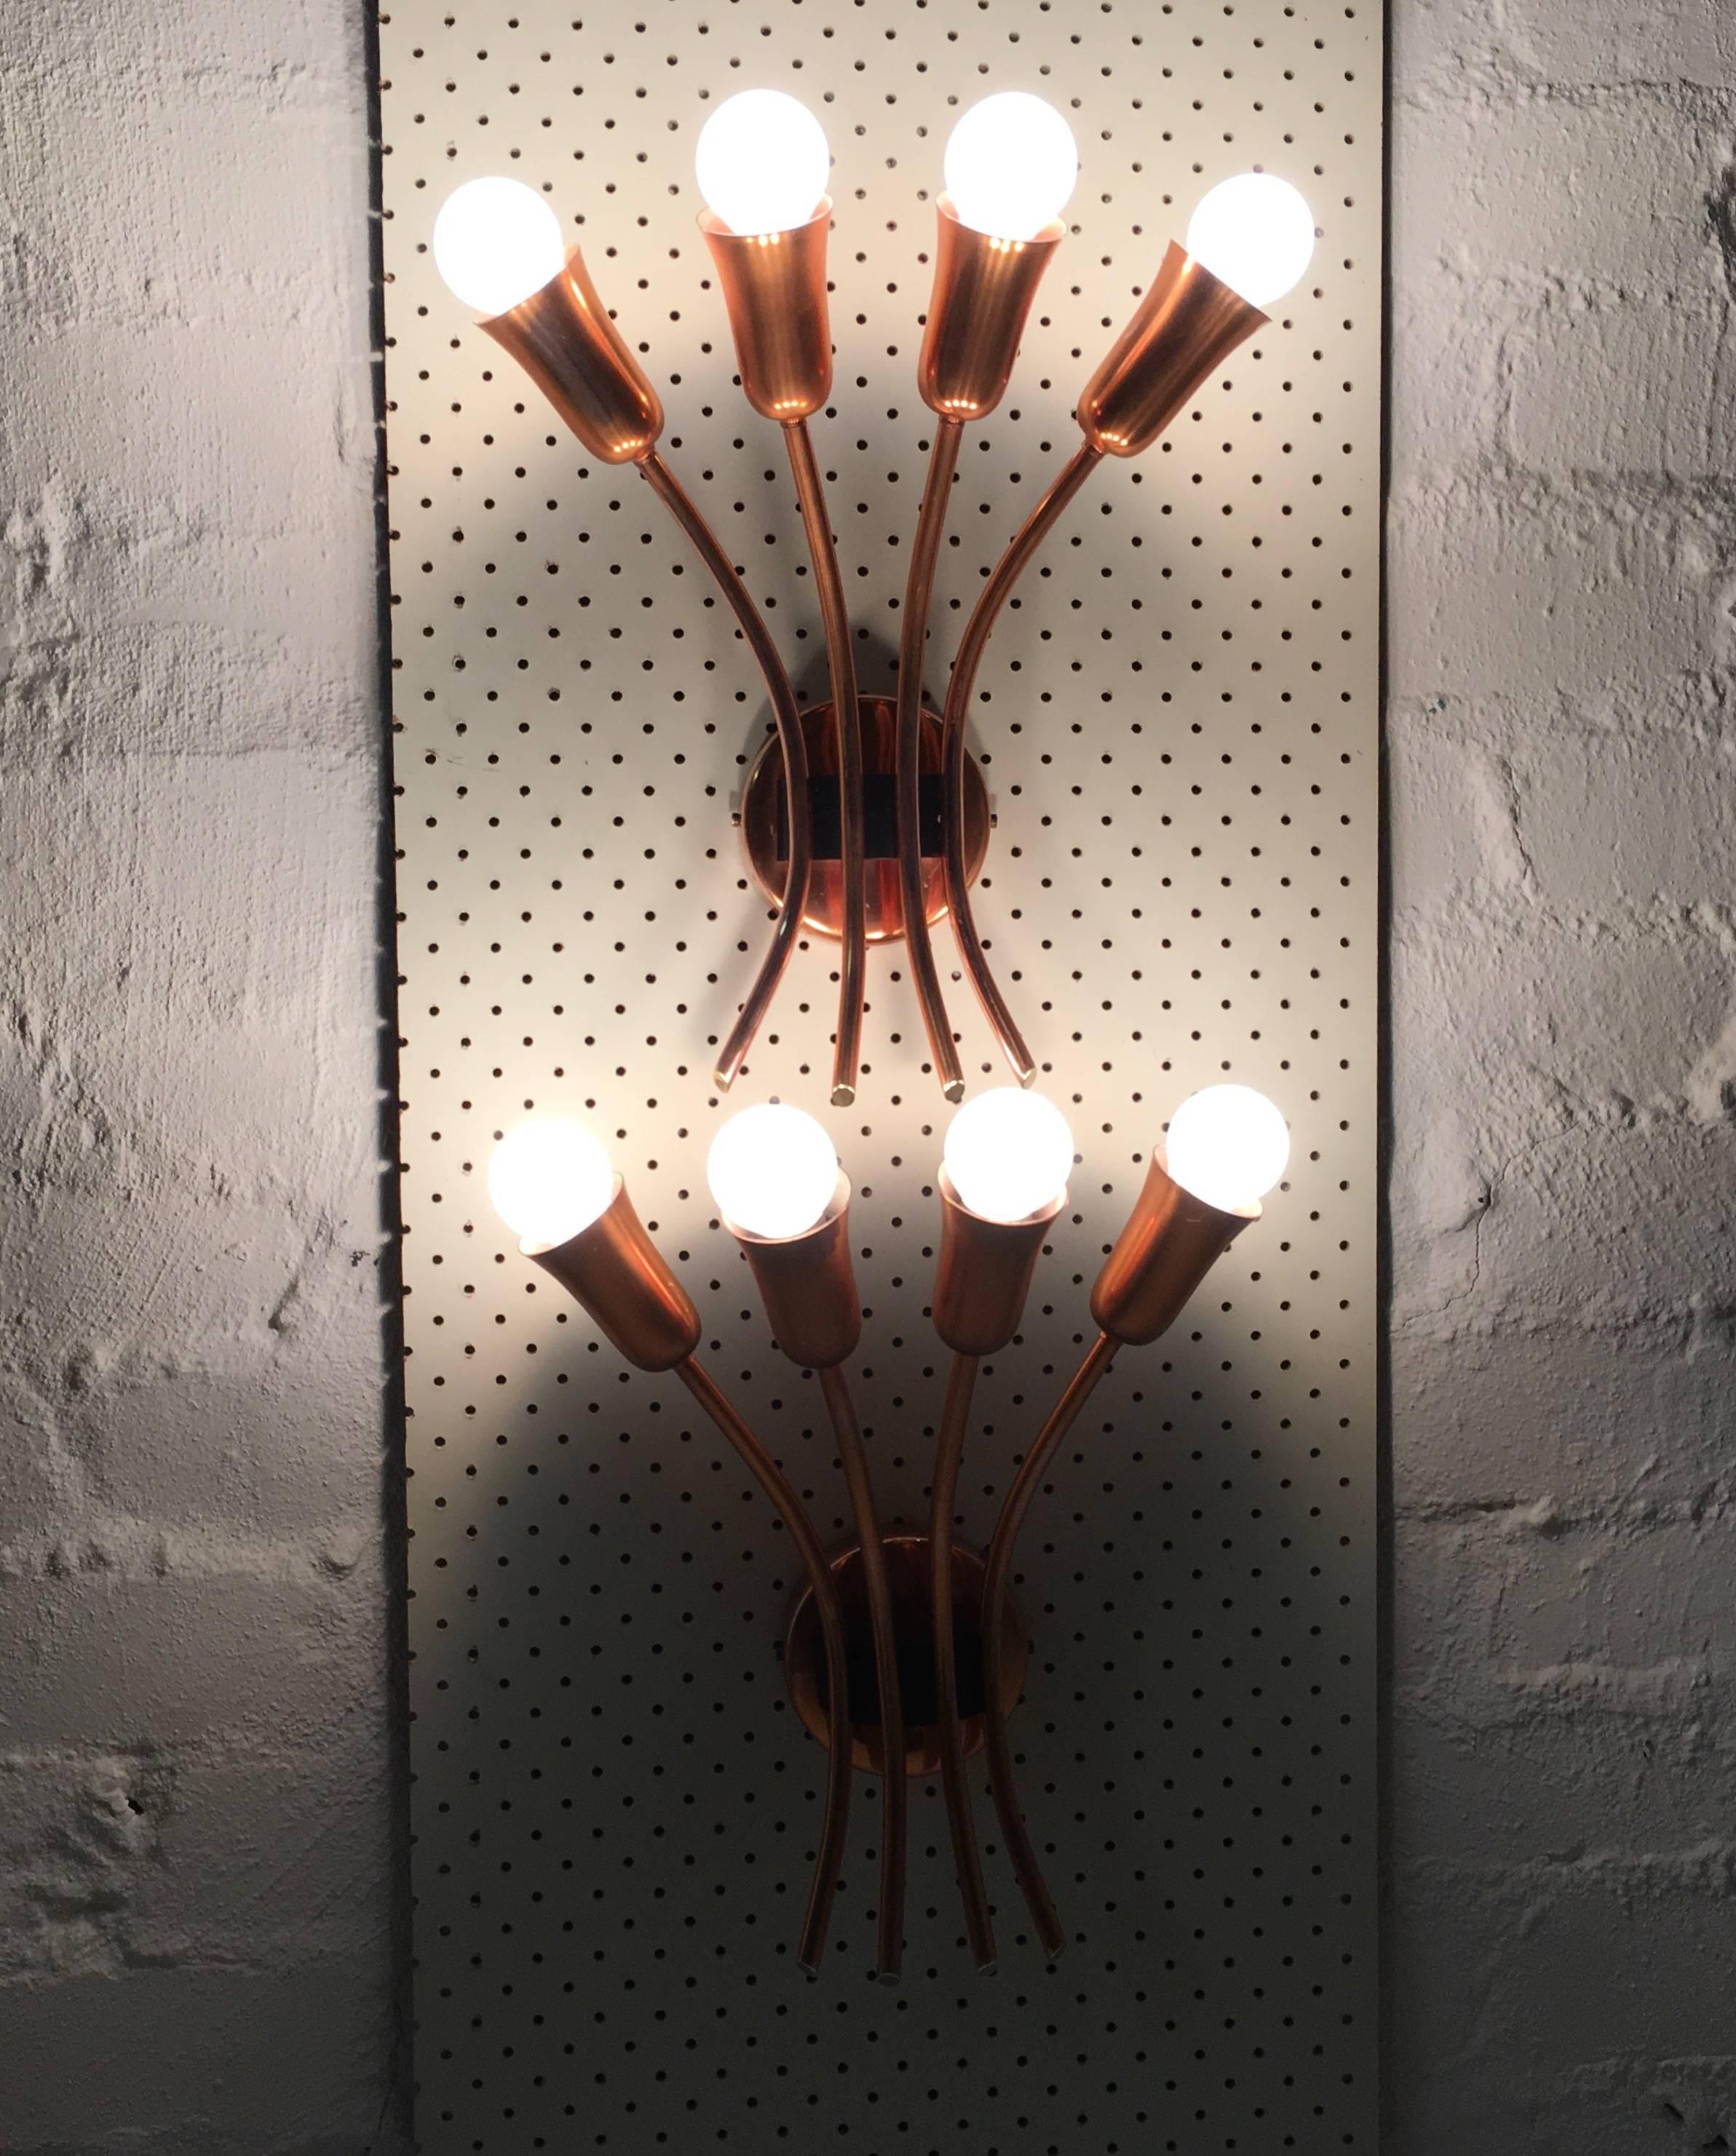 Brass Brown Evans and Co. 'BECO' Copper Wall Sconces for Anatol Kagan, Melbourne 1950s